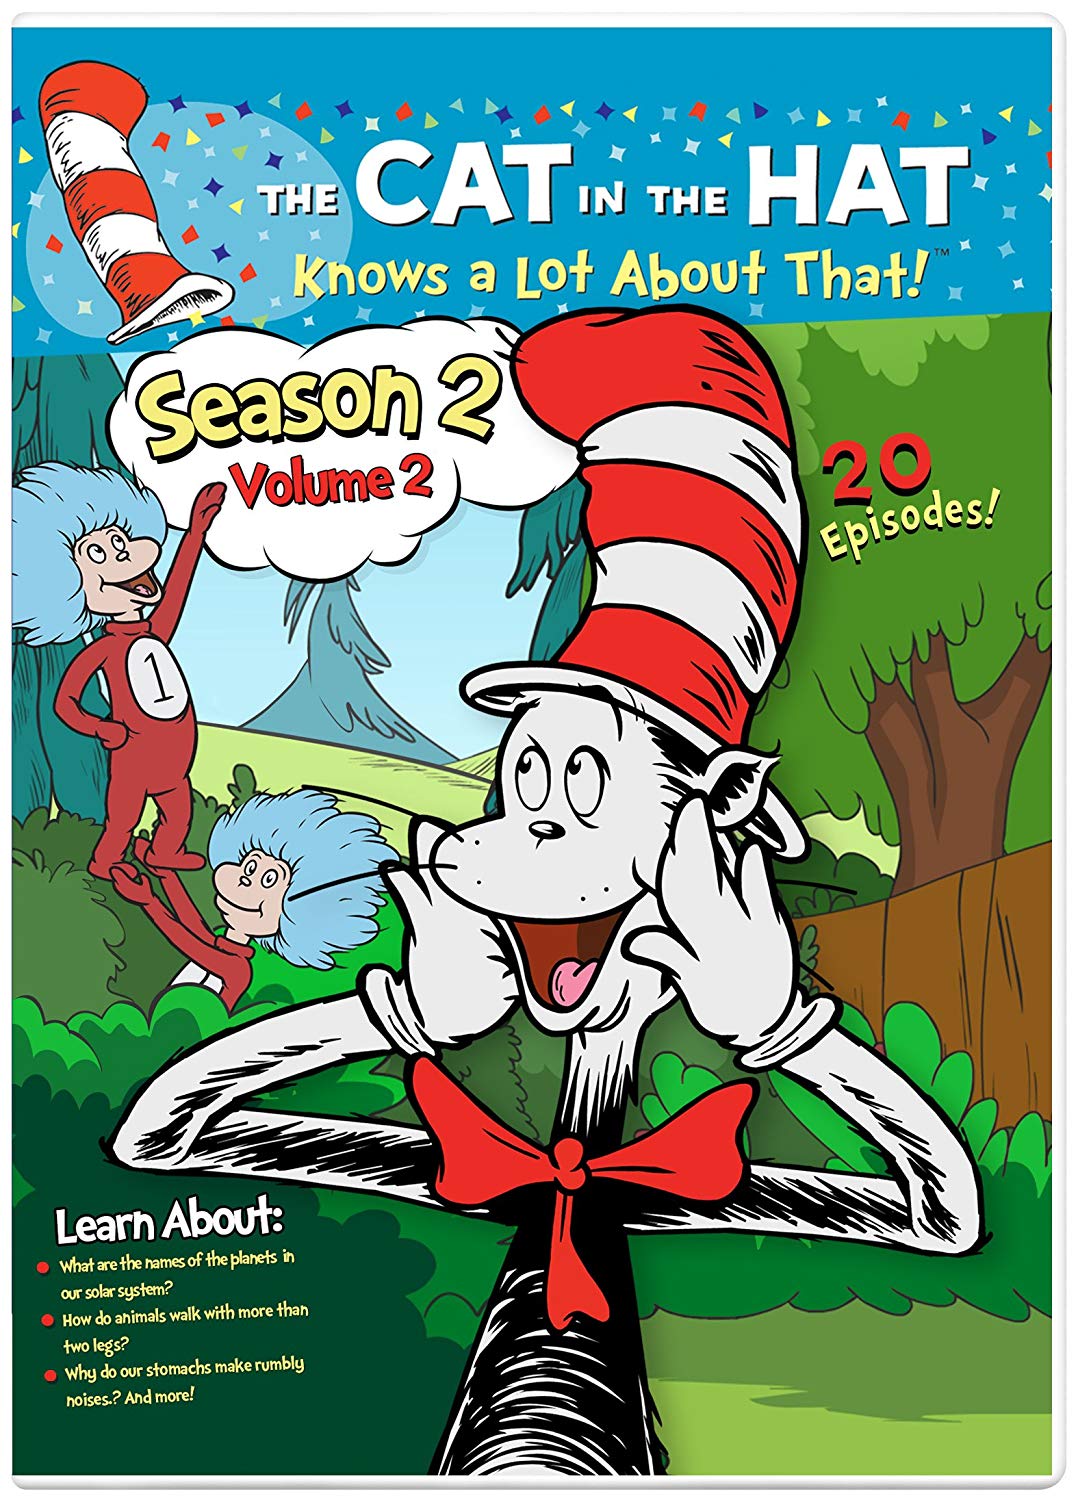 The Cat In The Hat Knows A Lot About That! Season 2, Volume 2 – Martin Short Rocks As Cat In The Hat In This Great Collection